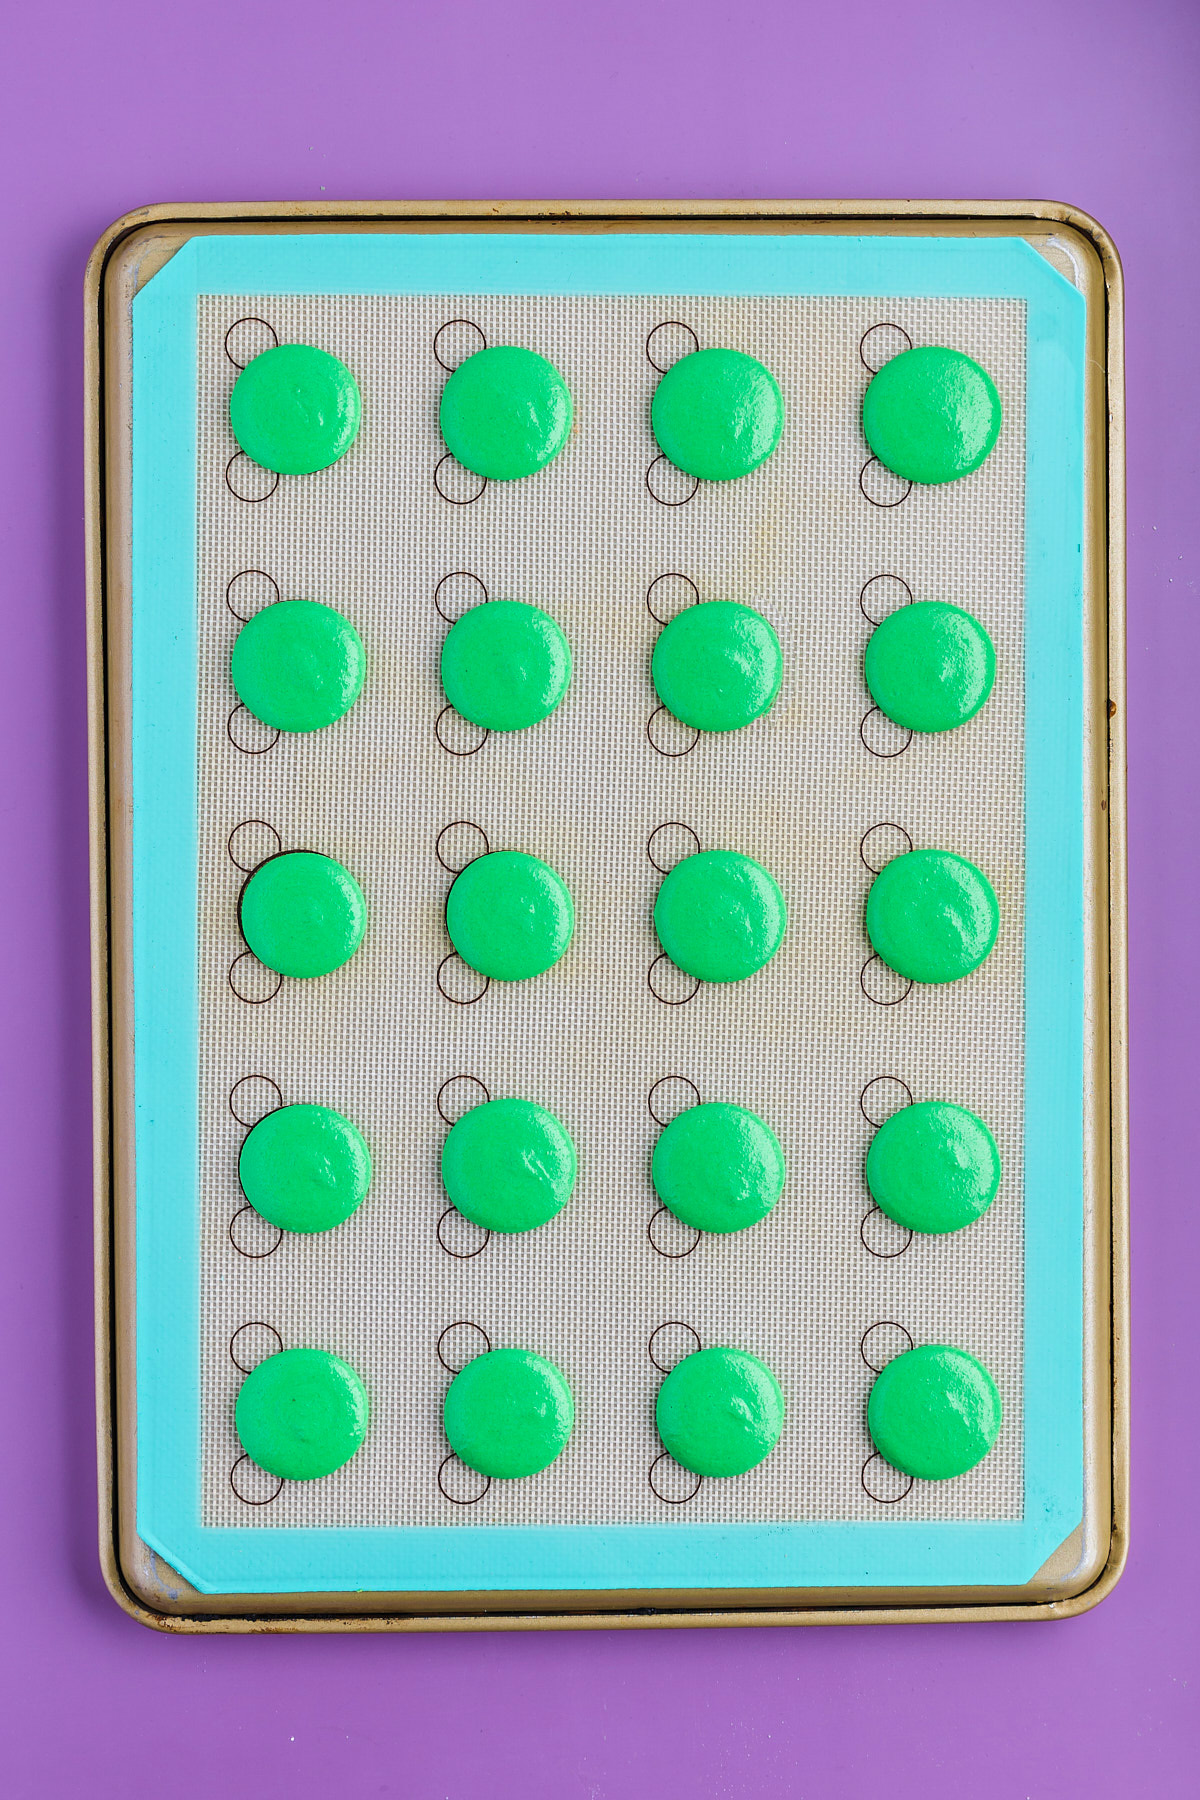 frankenstein macaron cookies piped onto tray